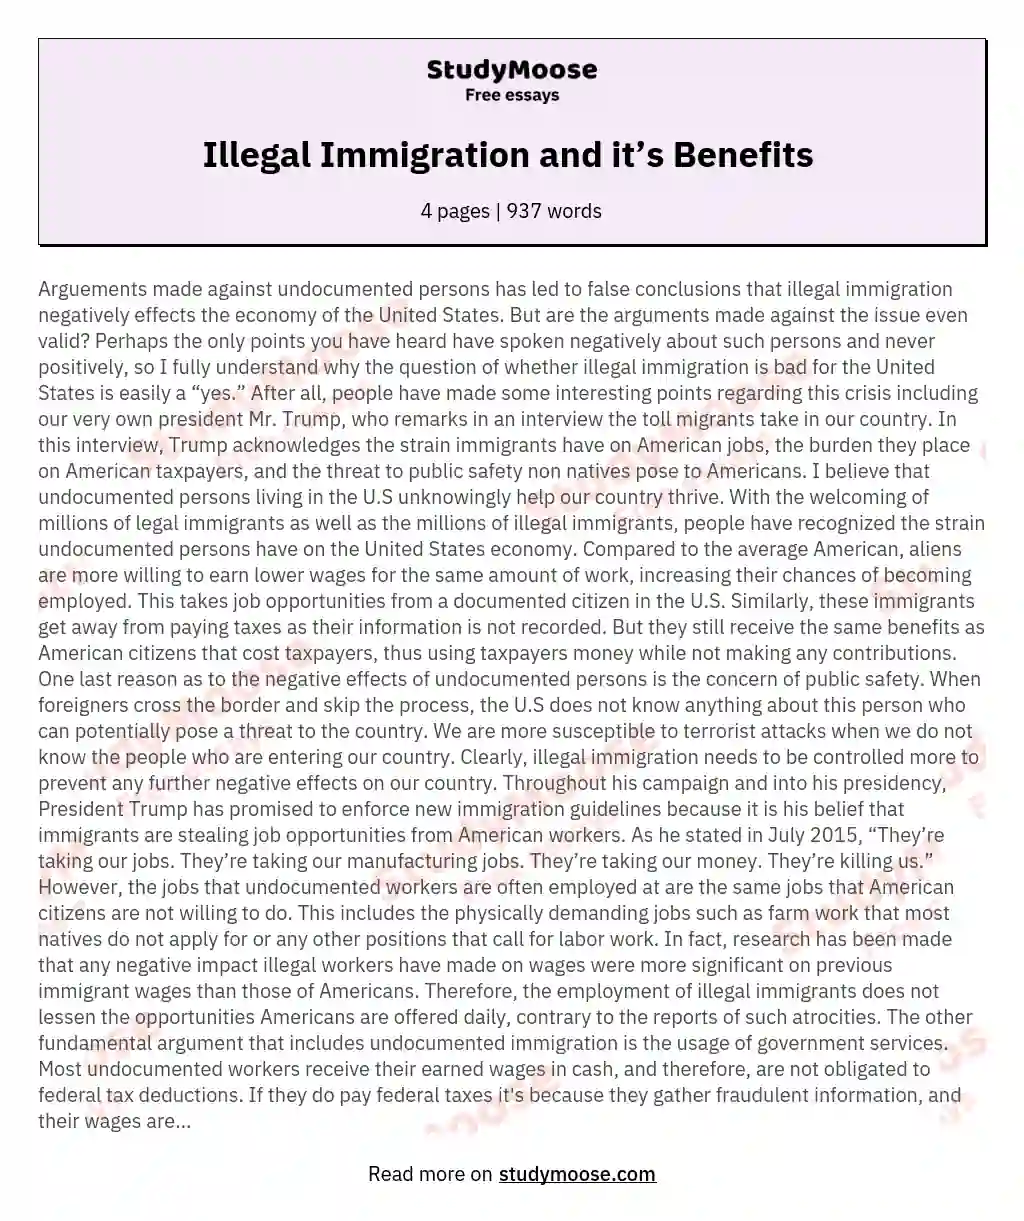 Illegal Immigration and it’s Benefits  essay